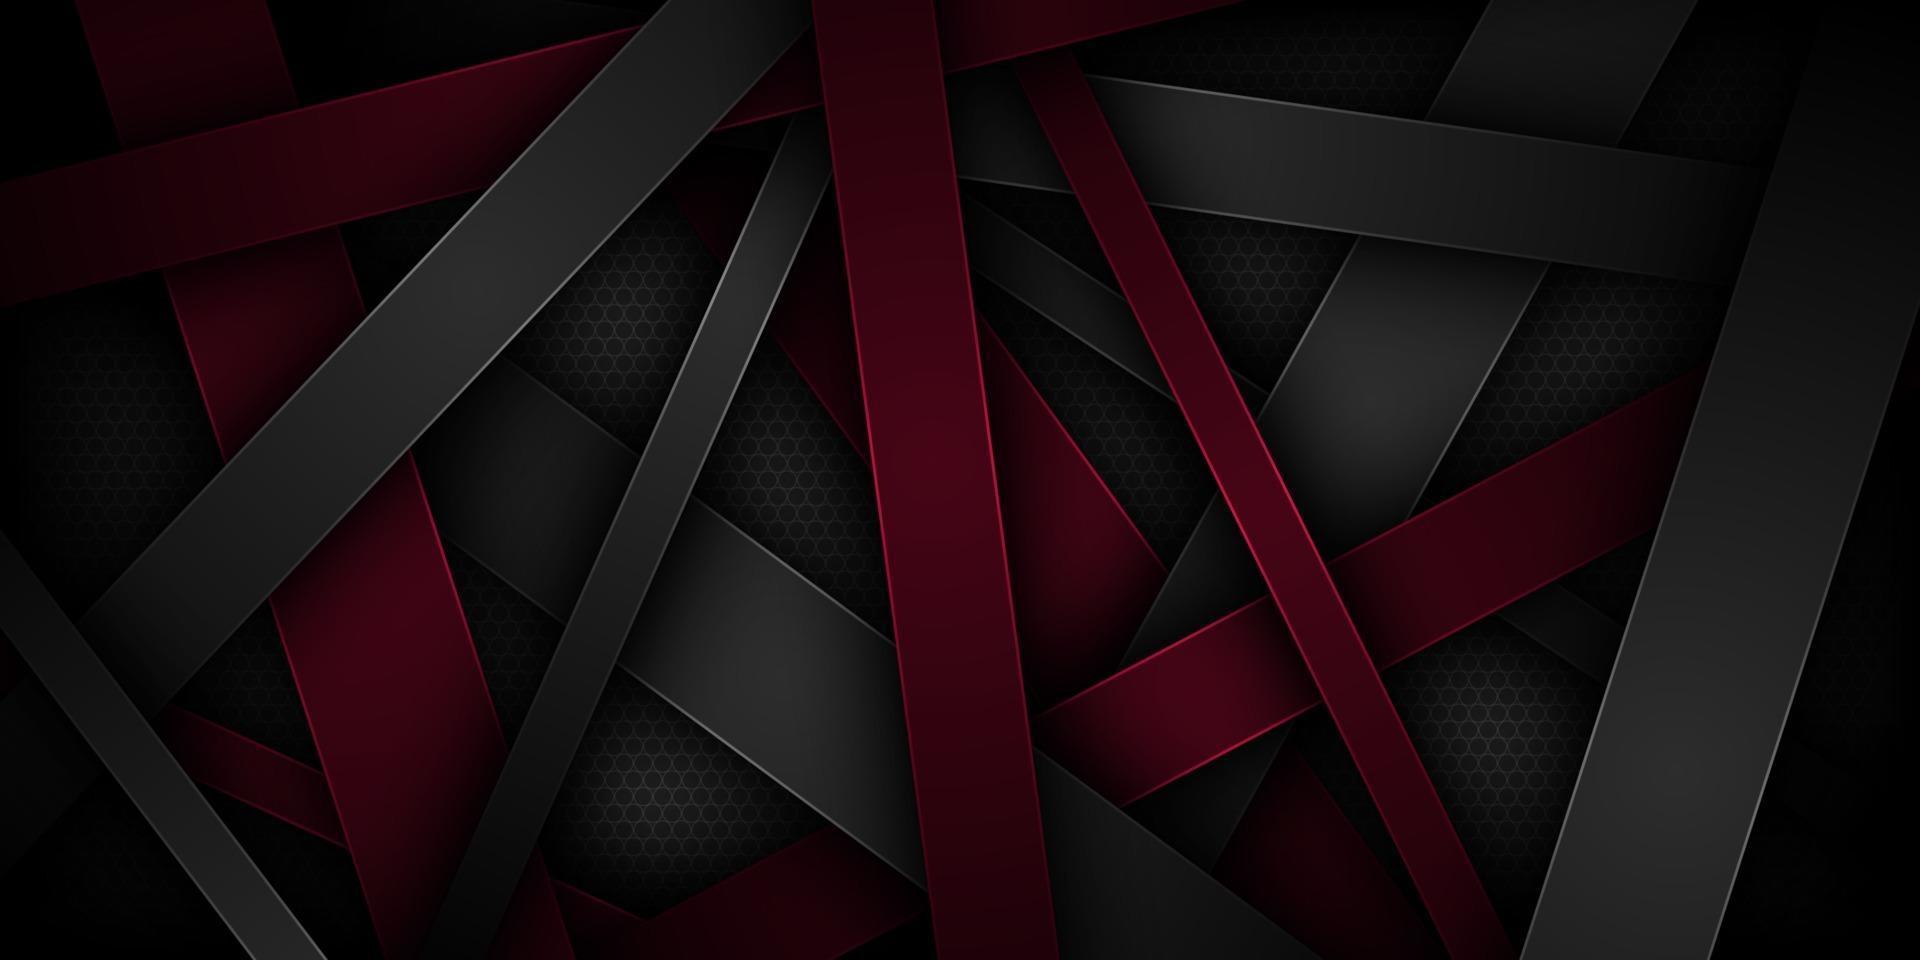 Black abstract vector background with overlapping characteristics